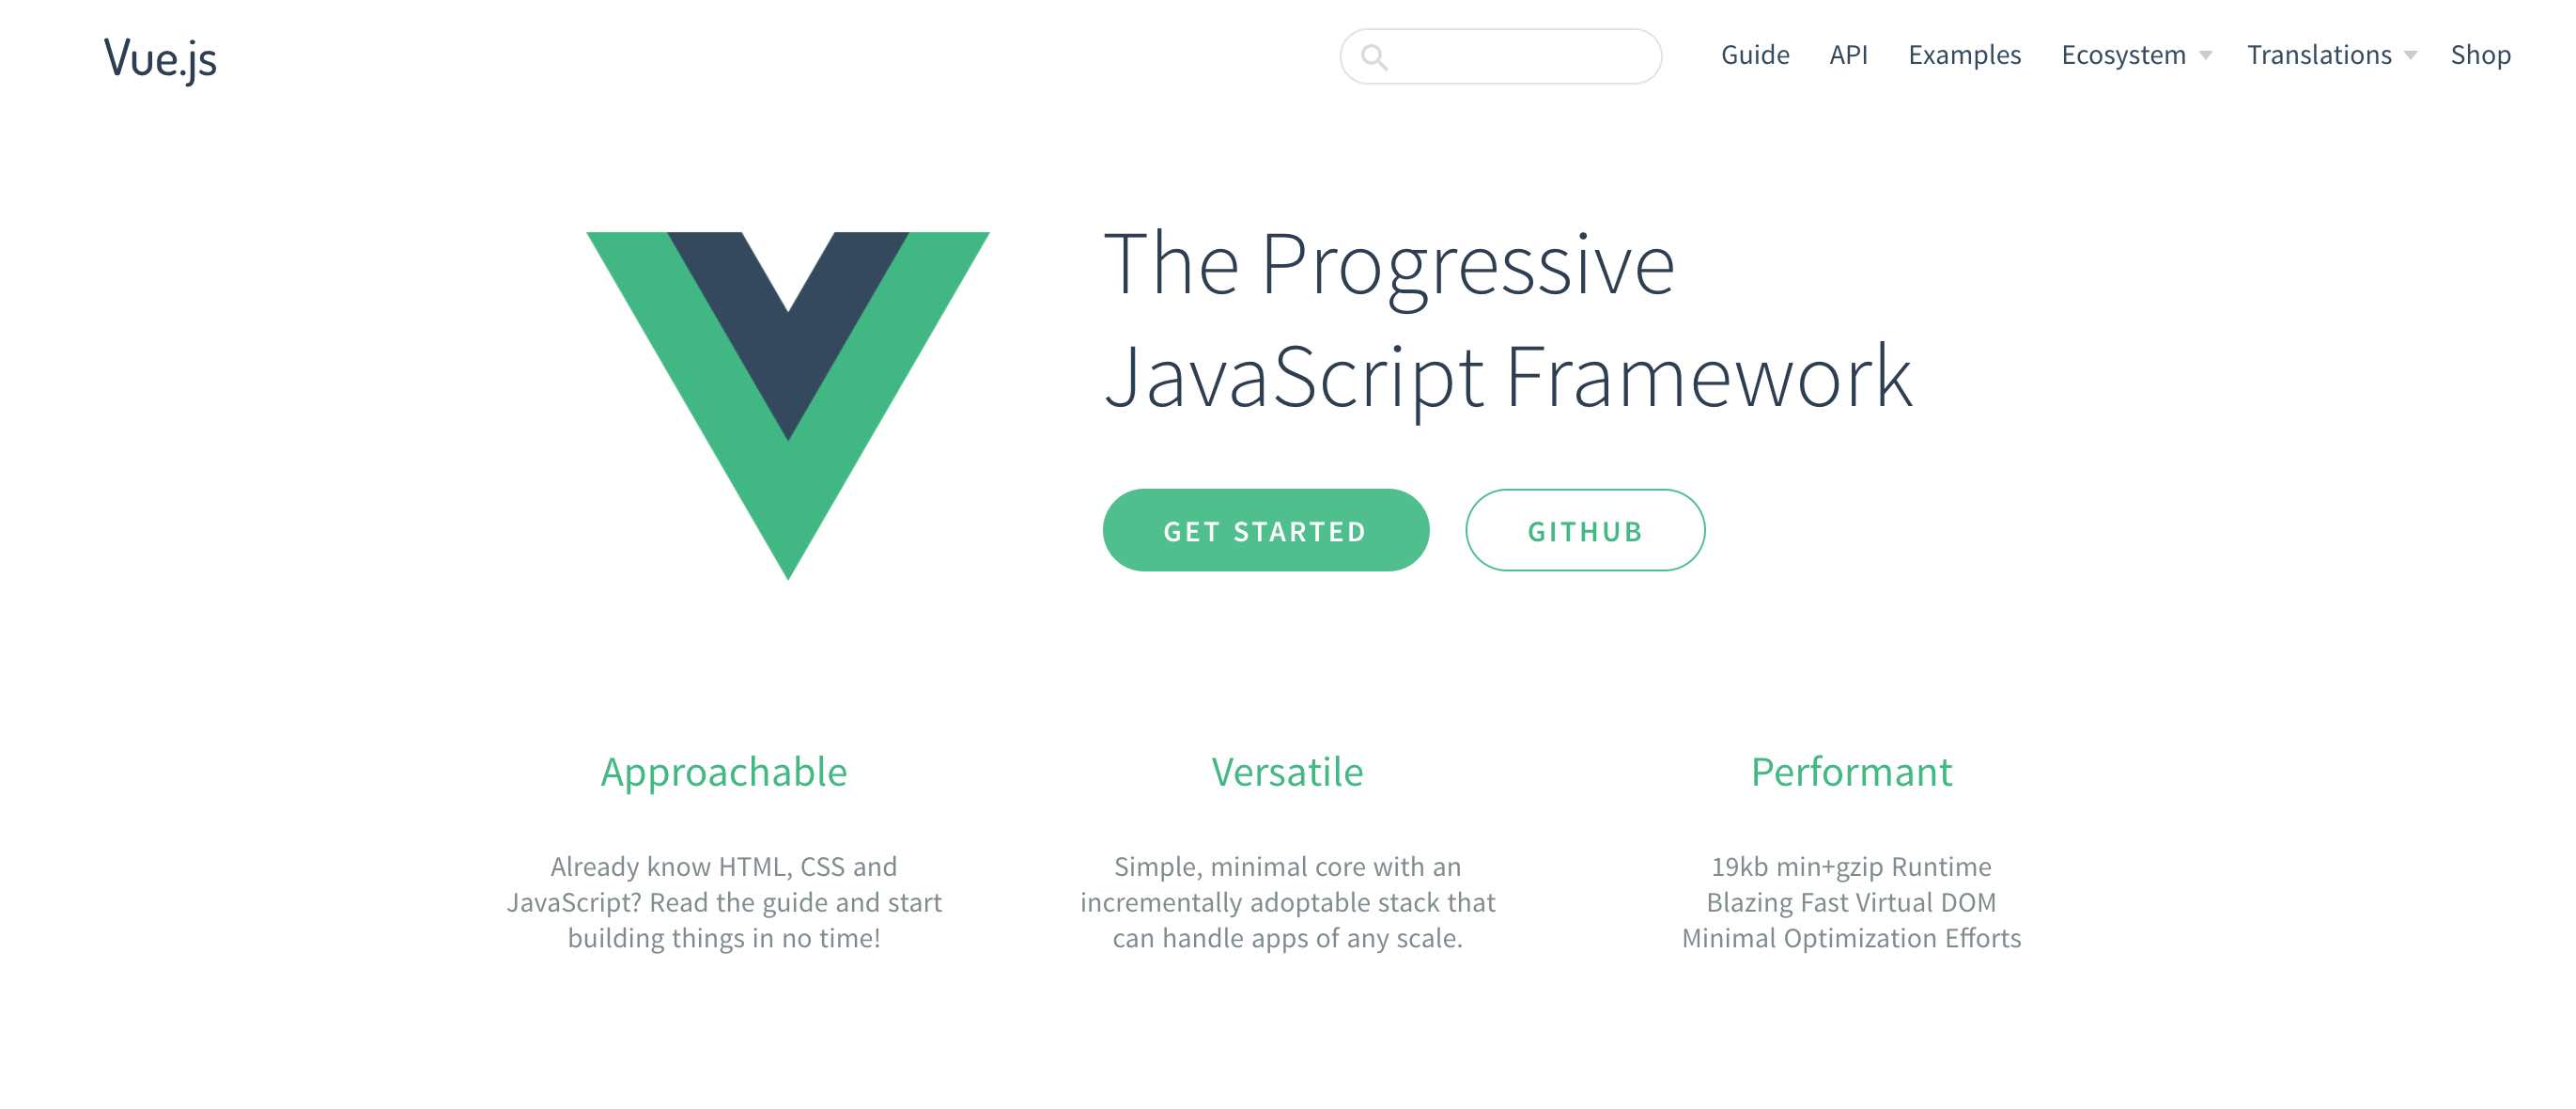 First impressions of Vue.js